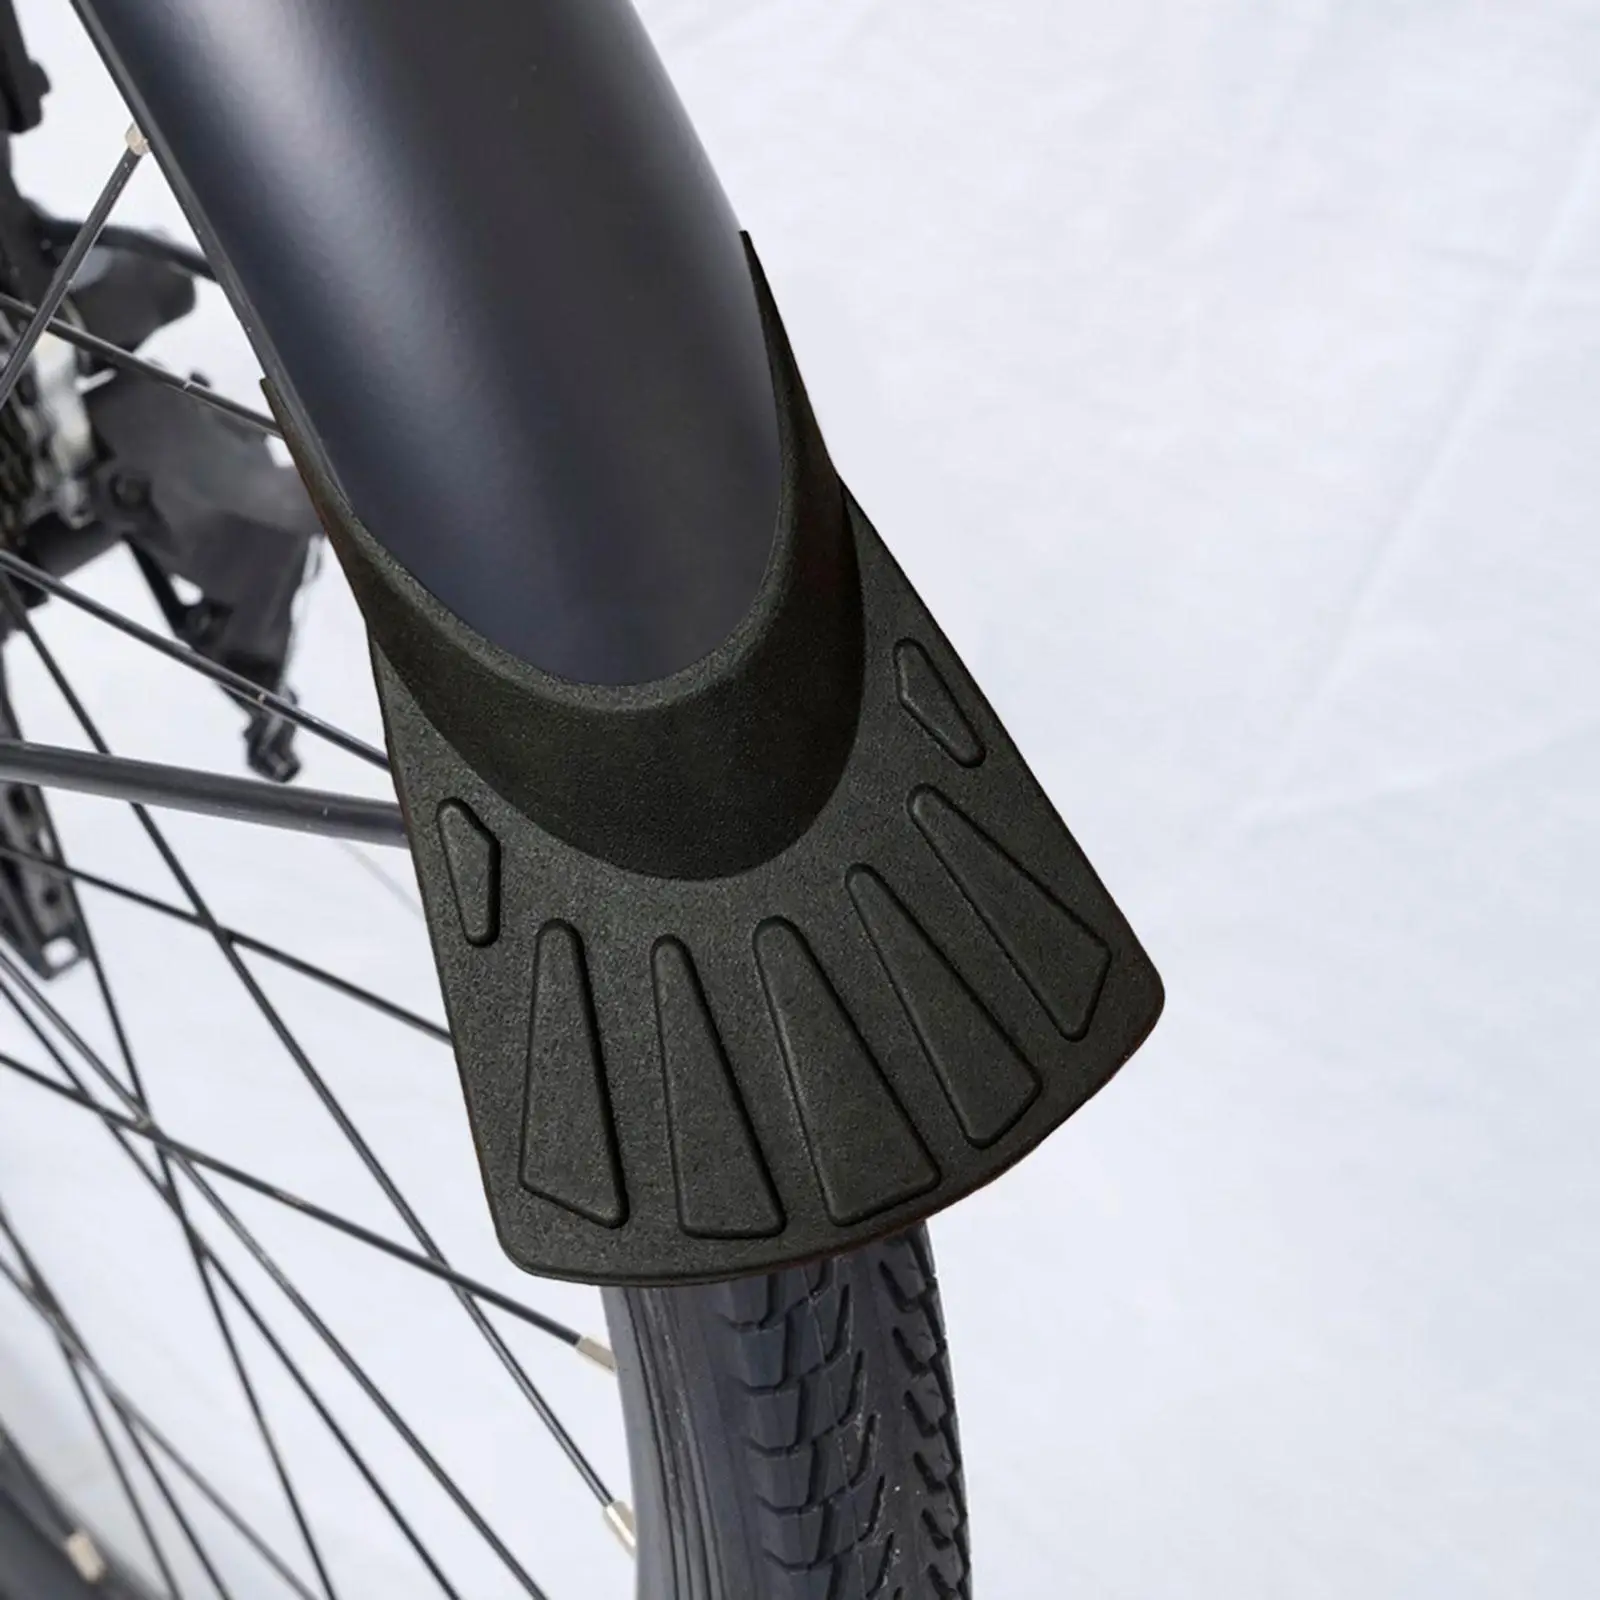 Bicycle Mudguard, Multipurpose Fishtail Cover for Road Bike, Outdoor Riding